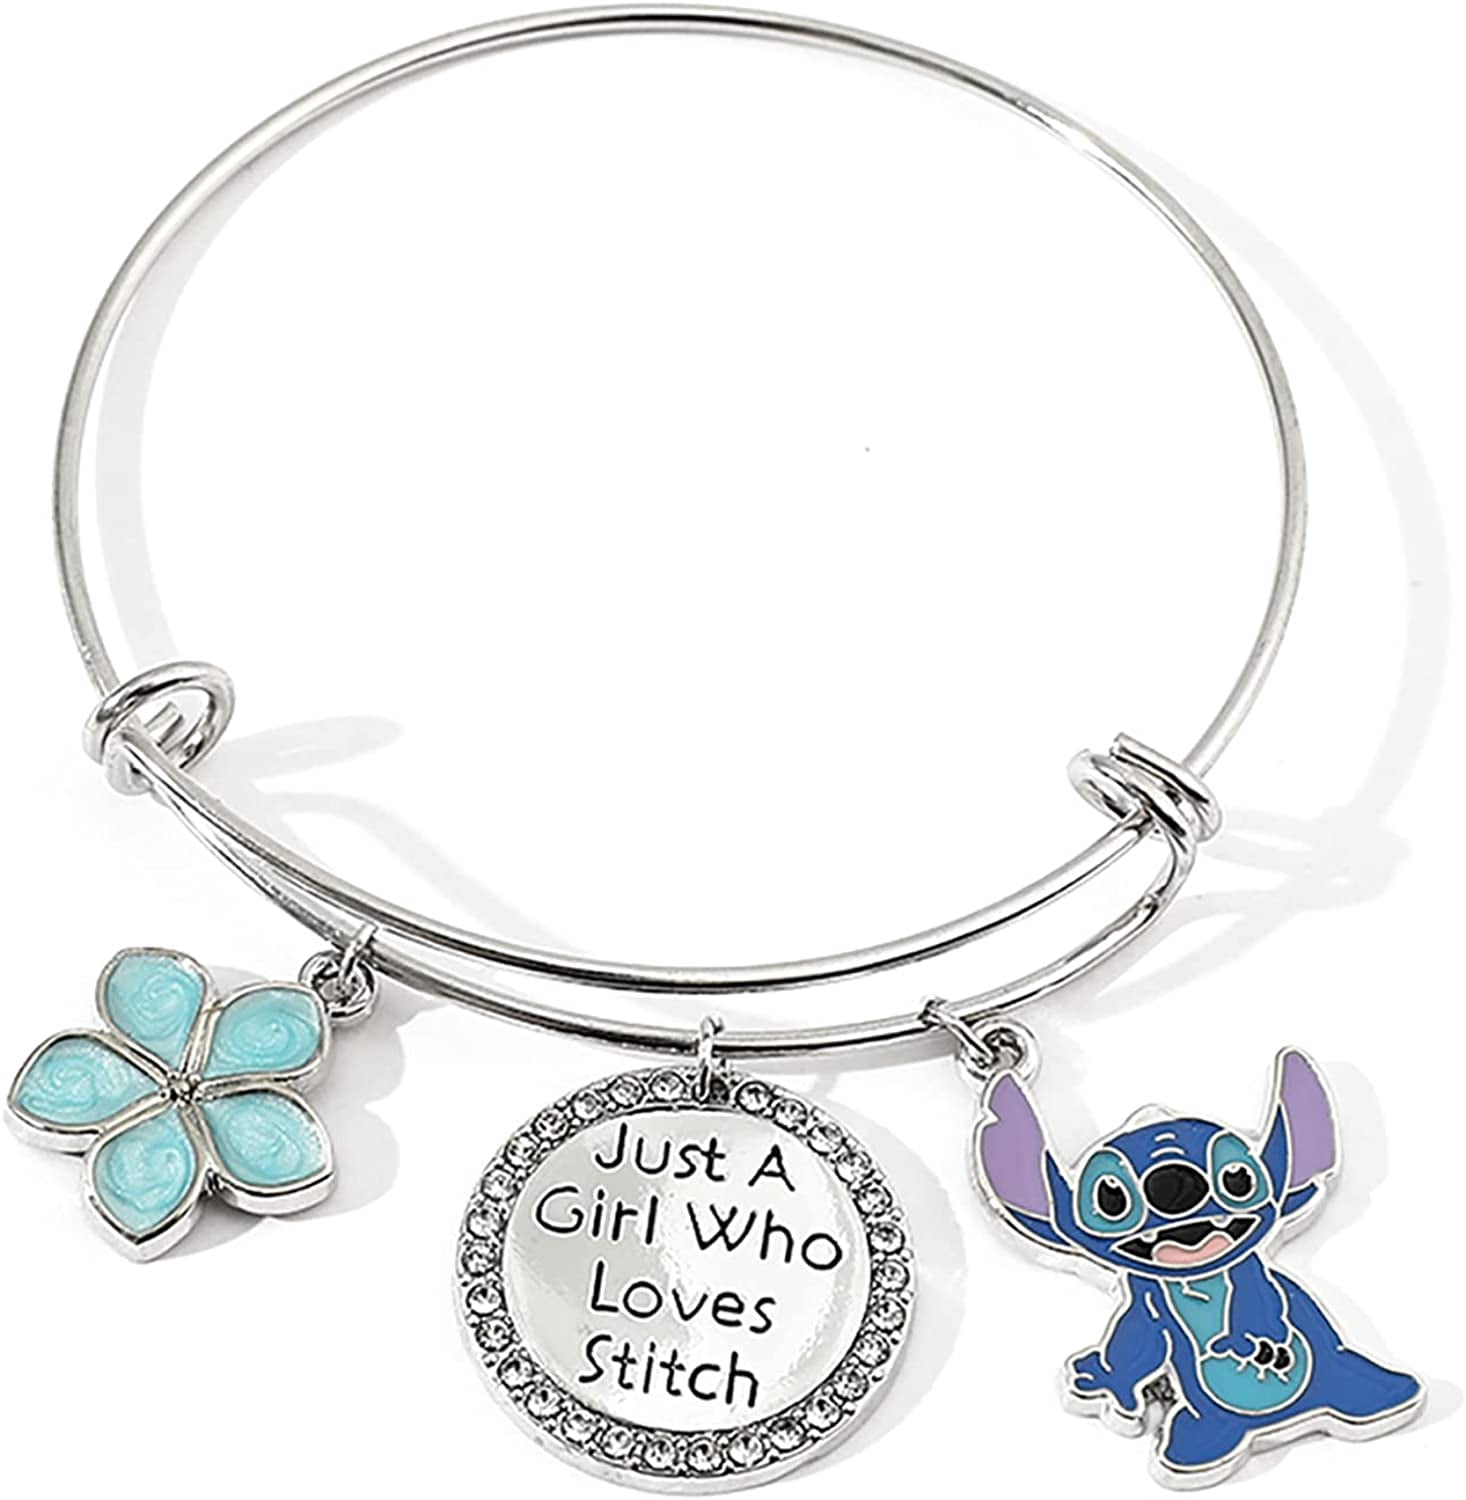 925 Sterling Silver Cartoon Series Lilo Stitch Charm Fit Bracelet Silver 925 Original Bead Charms for Jewelry Making Best Gift for Her